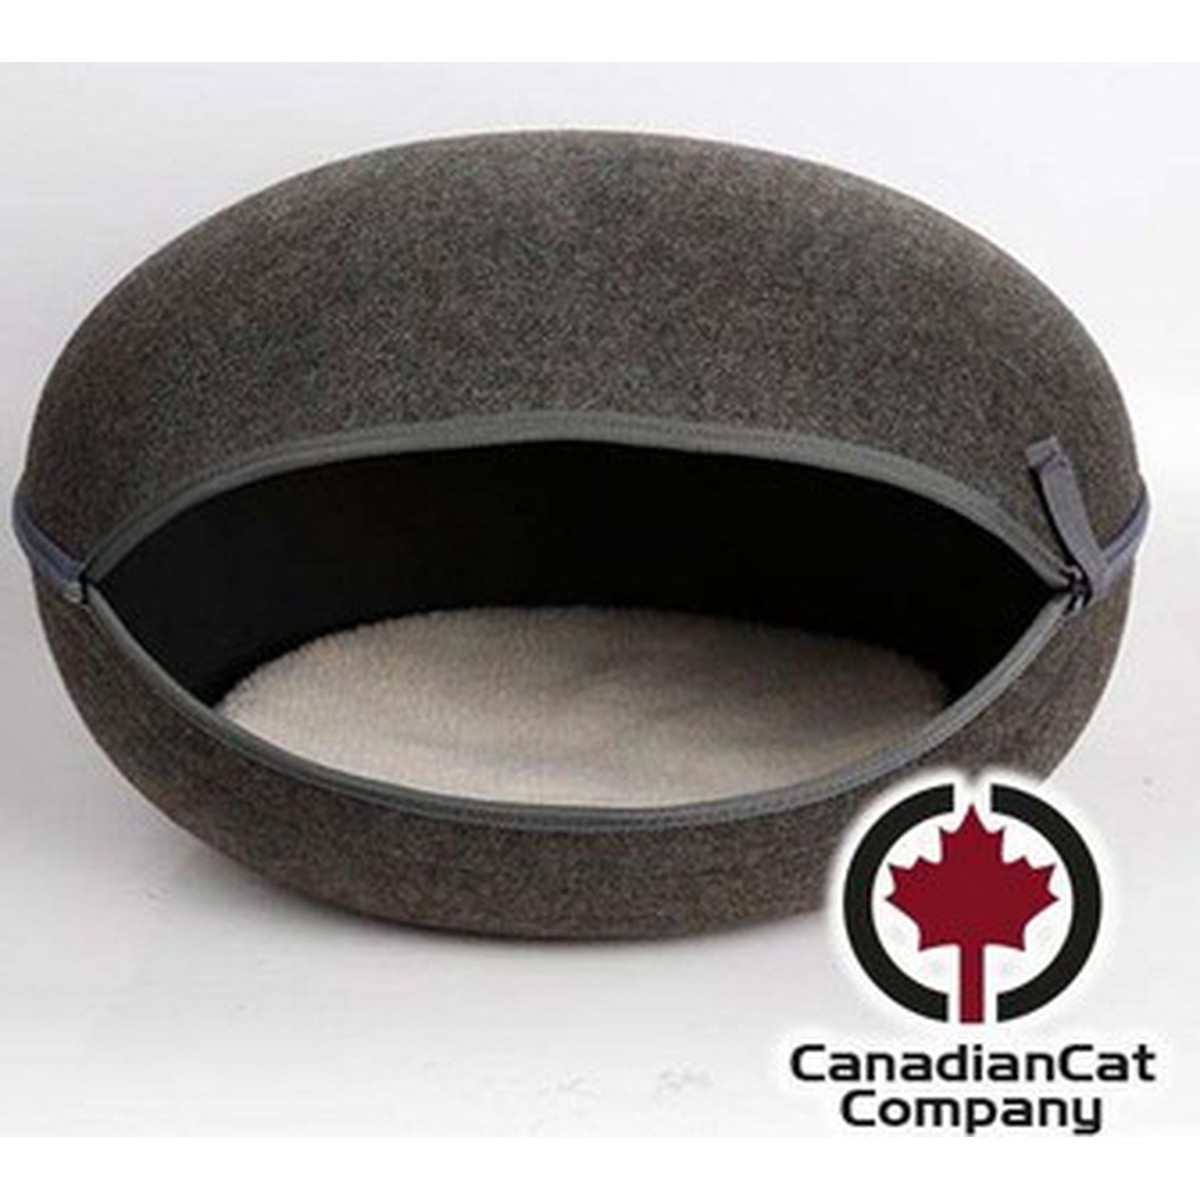   Nid pour chat  Canadian cat compagny  anthracite Gris anthracite 52 x 45 x 33 cm